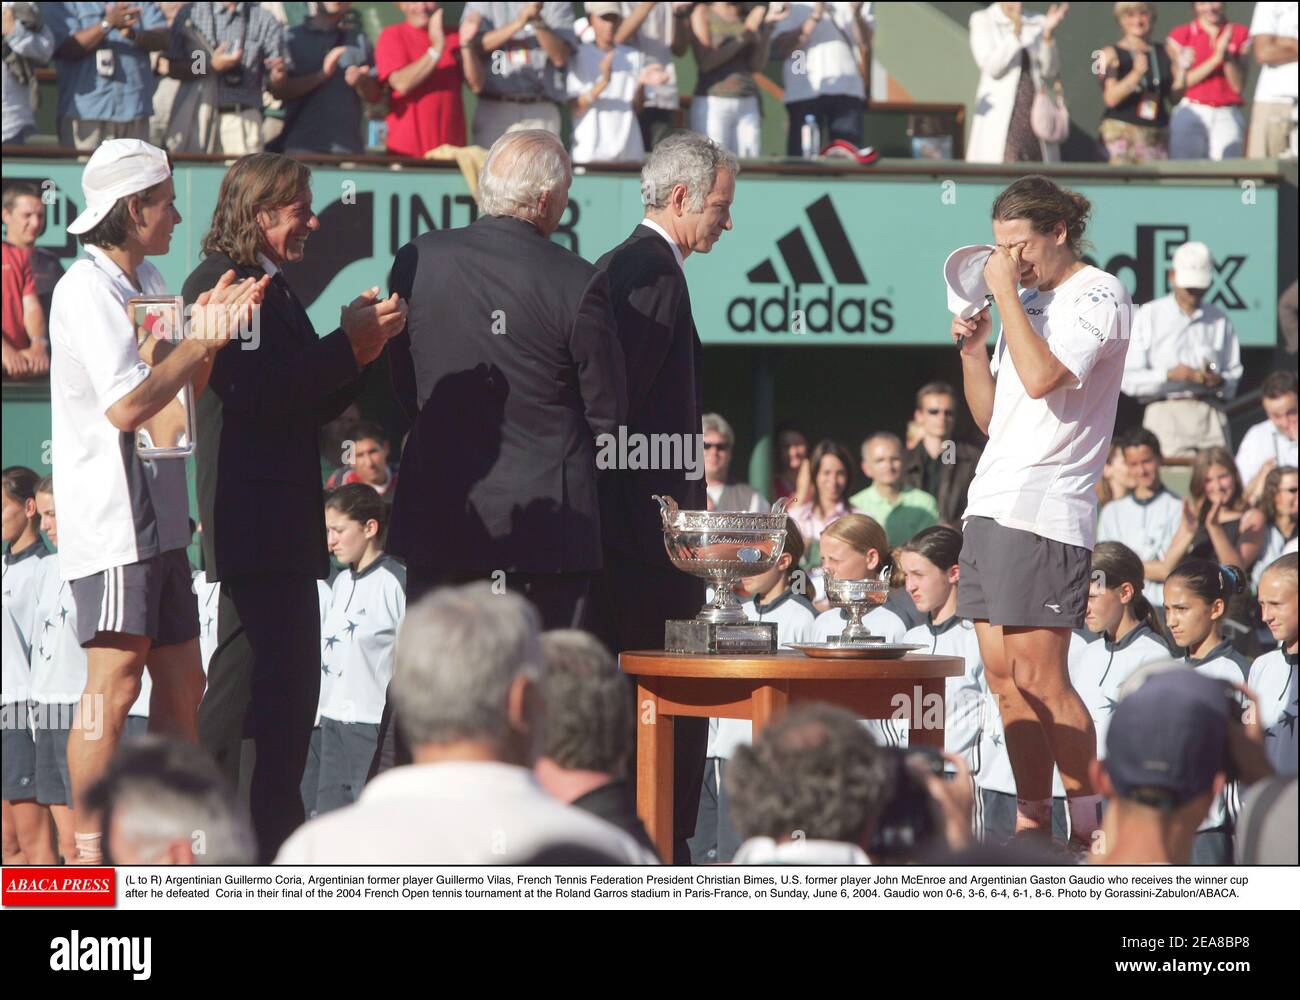 L to R) Argentinian Guillermo Coria, Argentinian former player Guillermo  Vilas, French Tennis Federation President Christian Bimes, U.S. former  player John McEnroe and Argentinian Gaston Gaudio who receives the winner  cup after